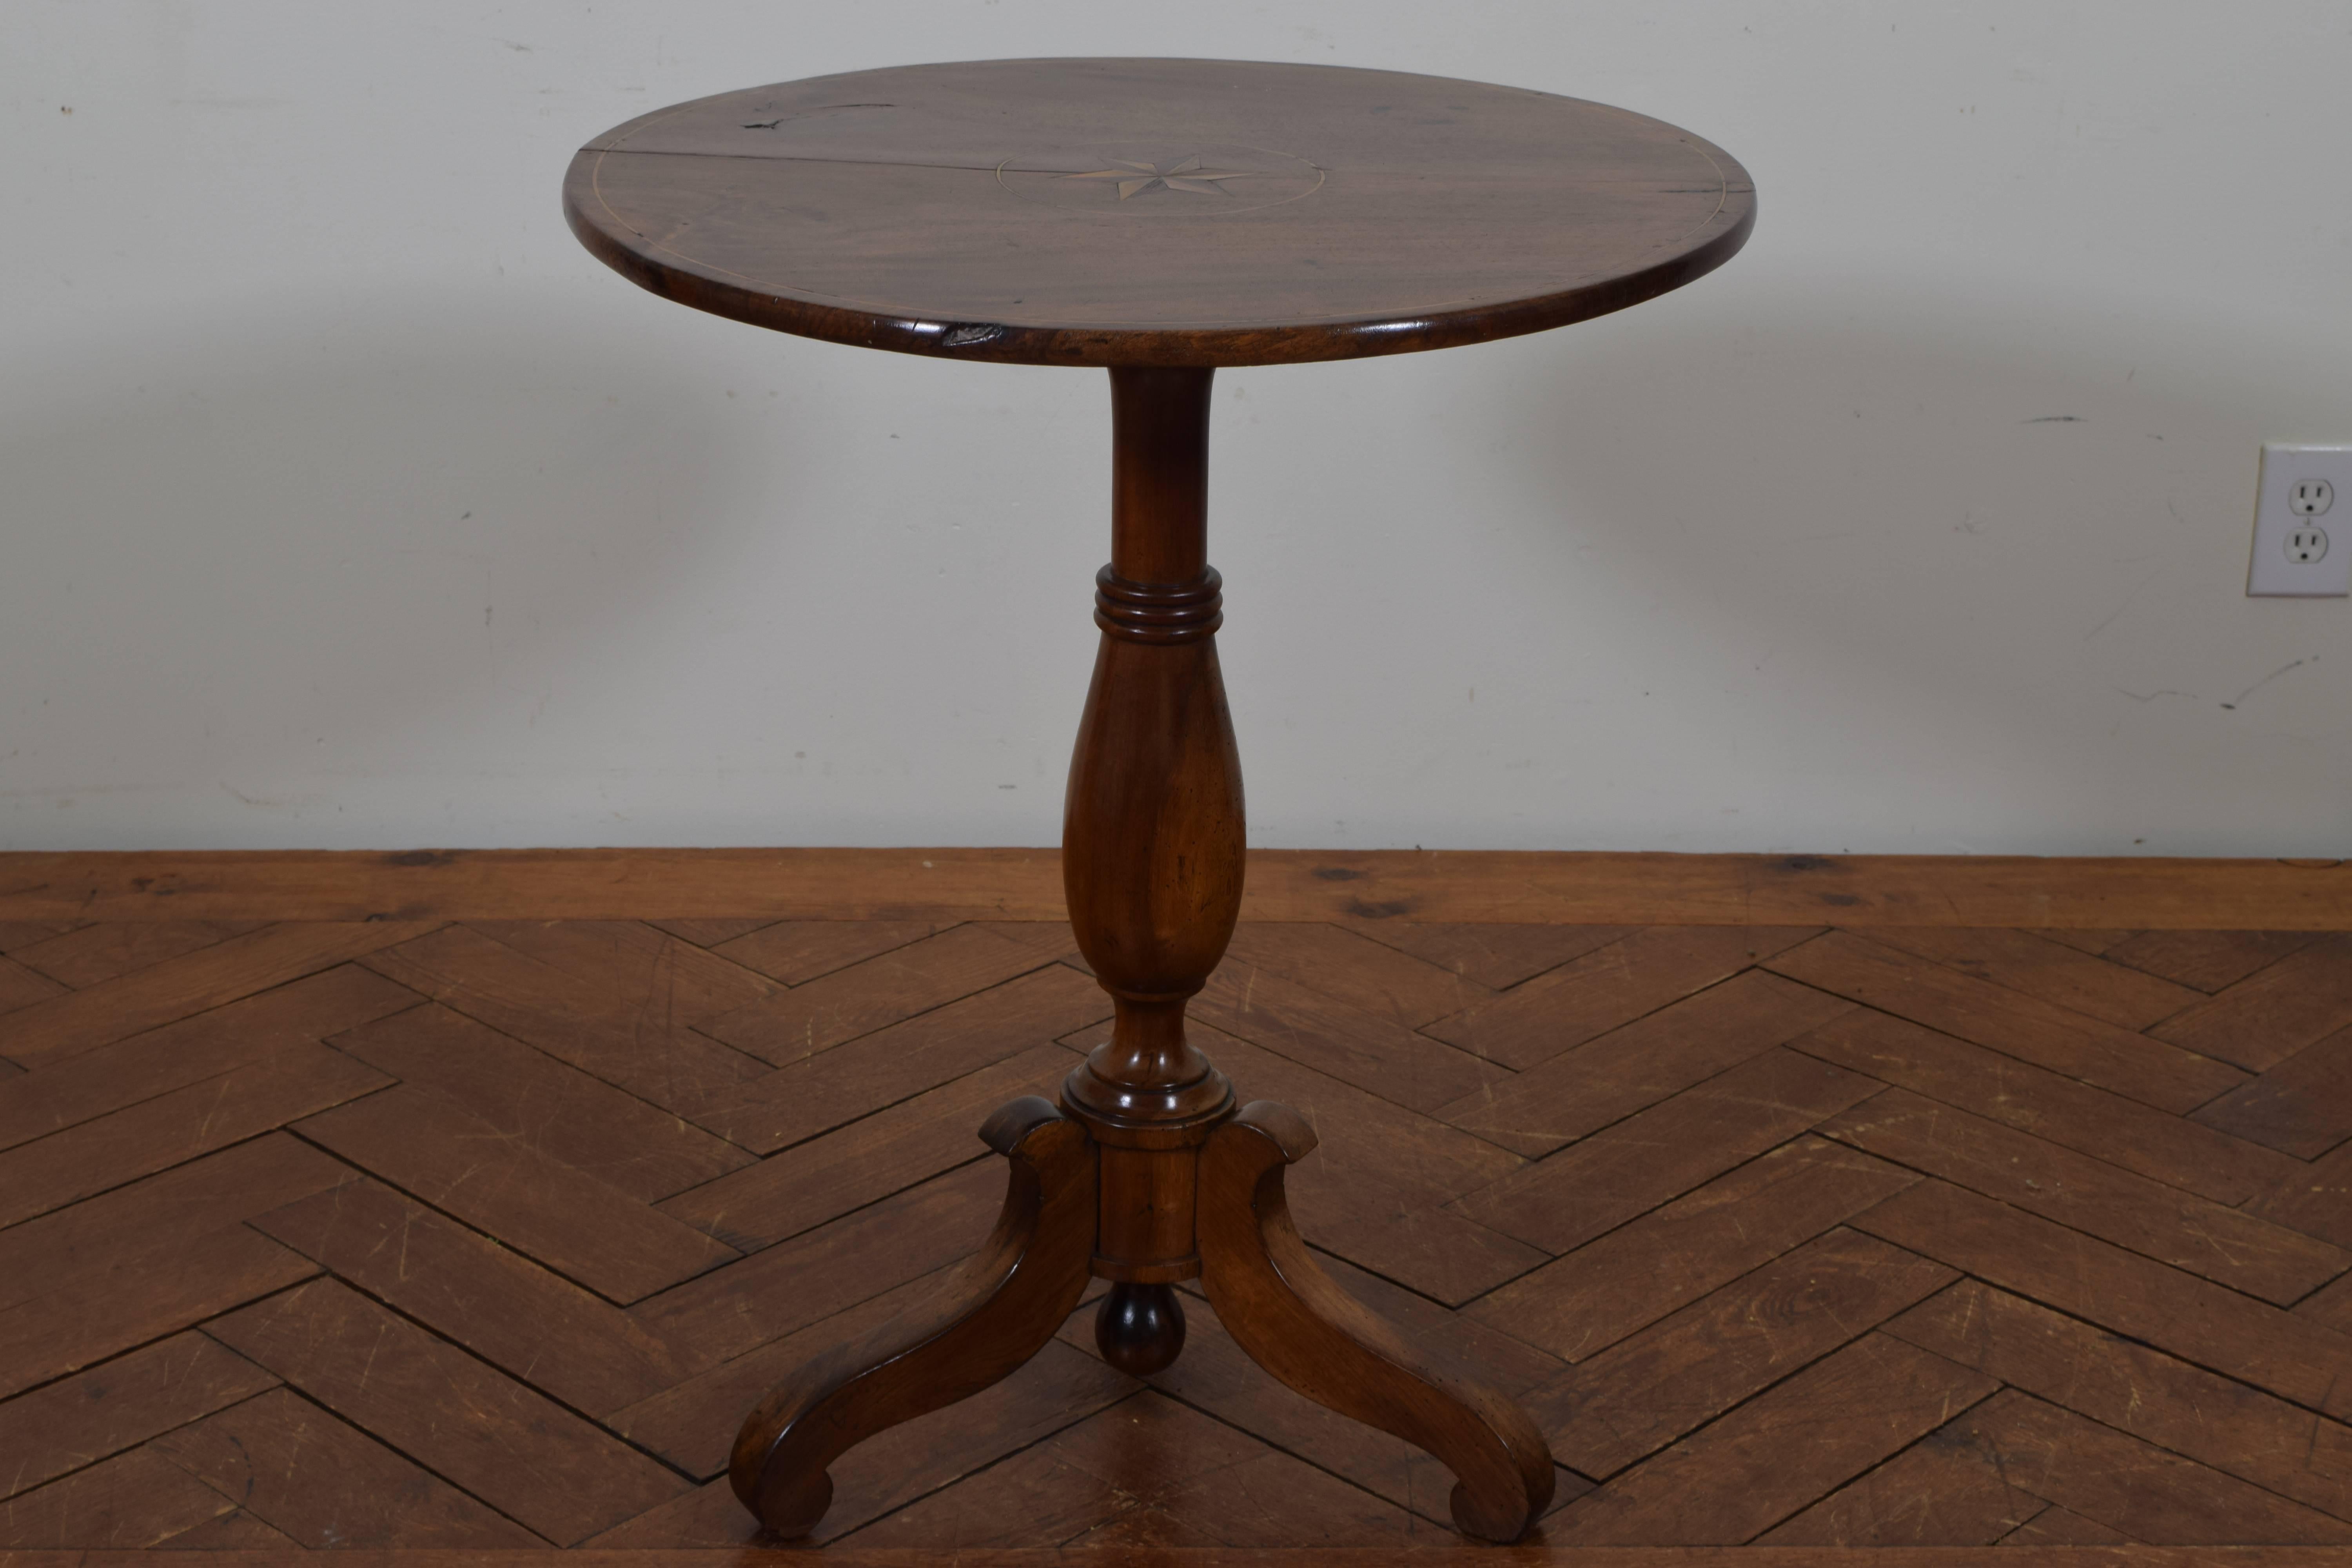 The circular top with an outer inlaid band and a centered star within a circular band, raised on a turned standard atop a round base issuing three curved legs with downward circular feet.